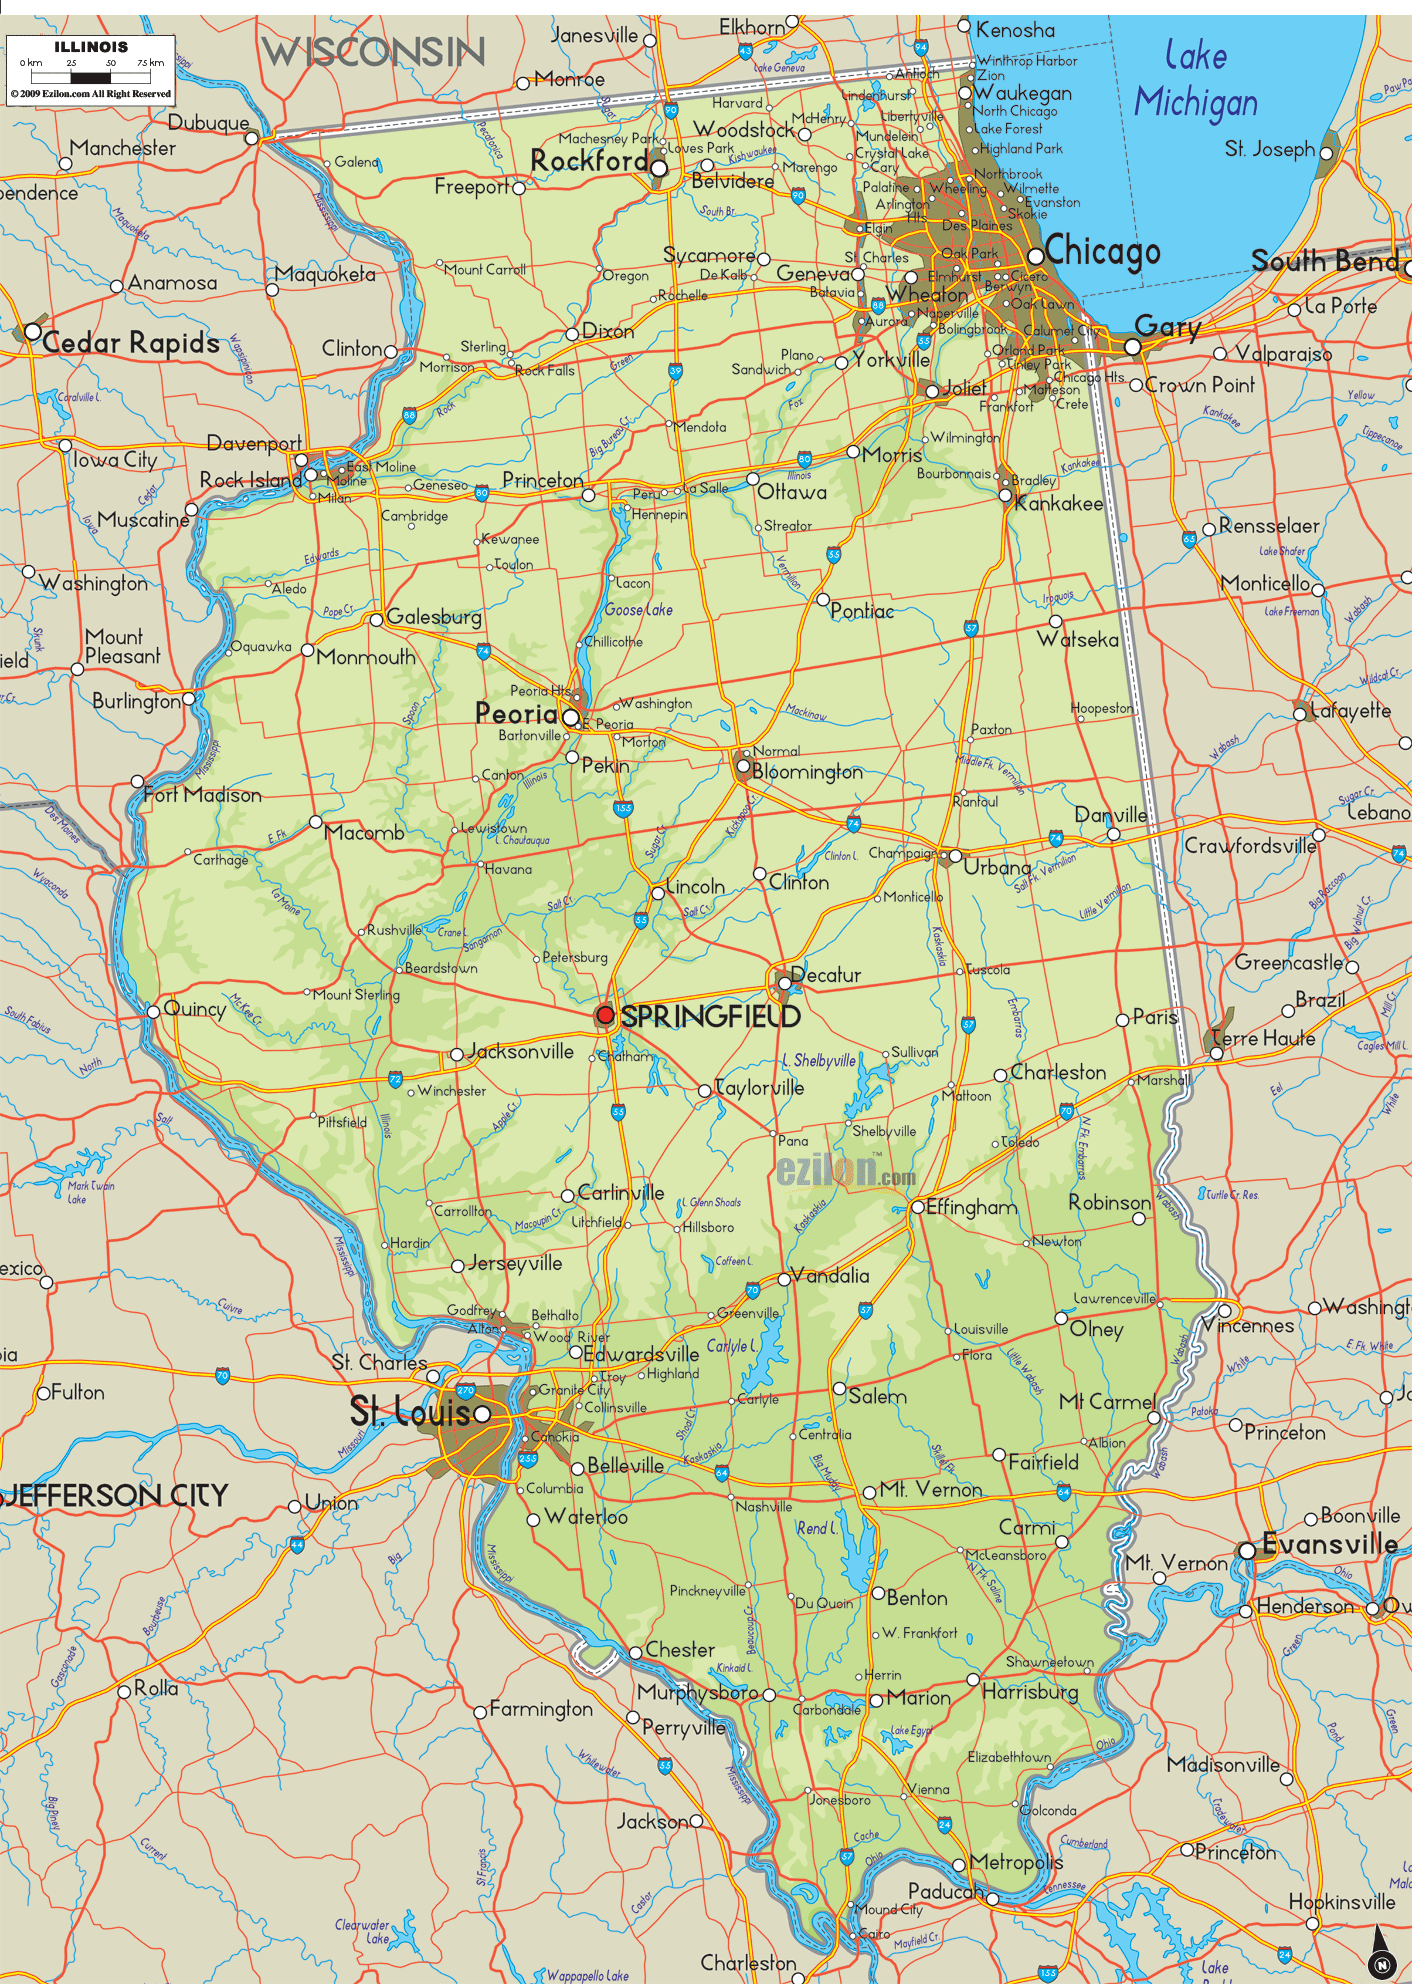 Physical map of Illinois State, USA showing major geographical features such as rivers, lakes, topography and land formations.